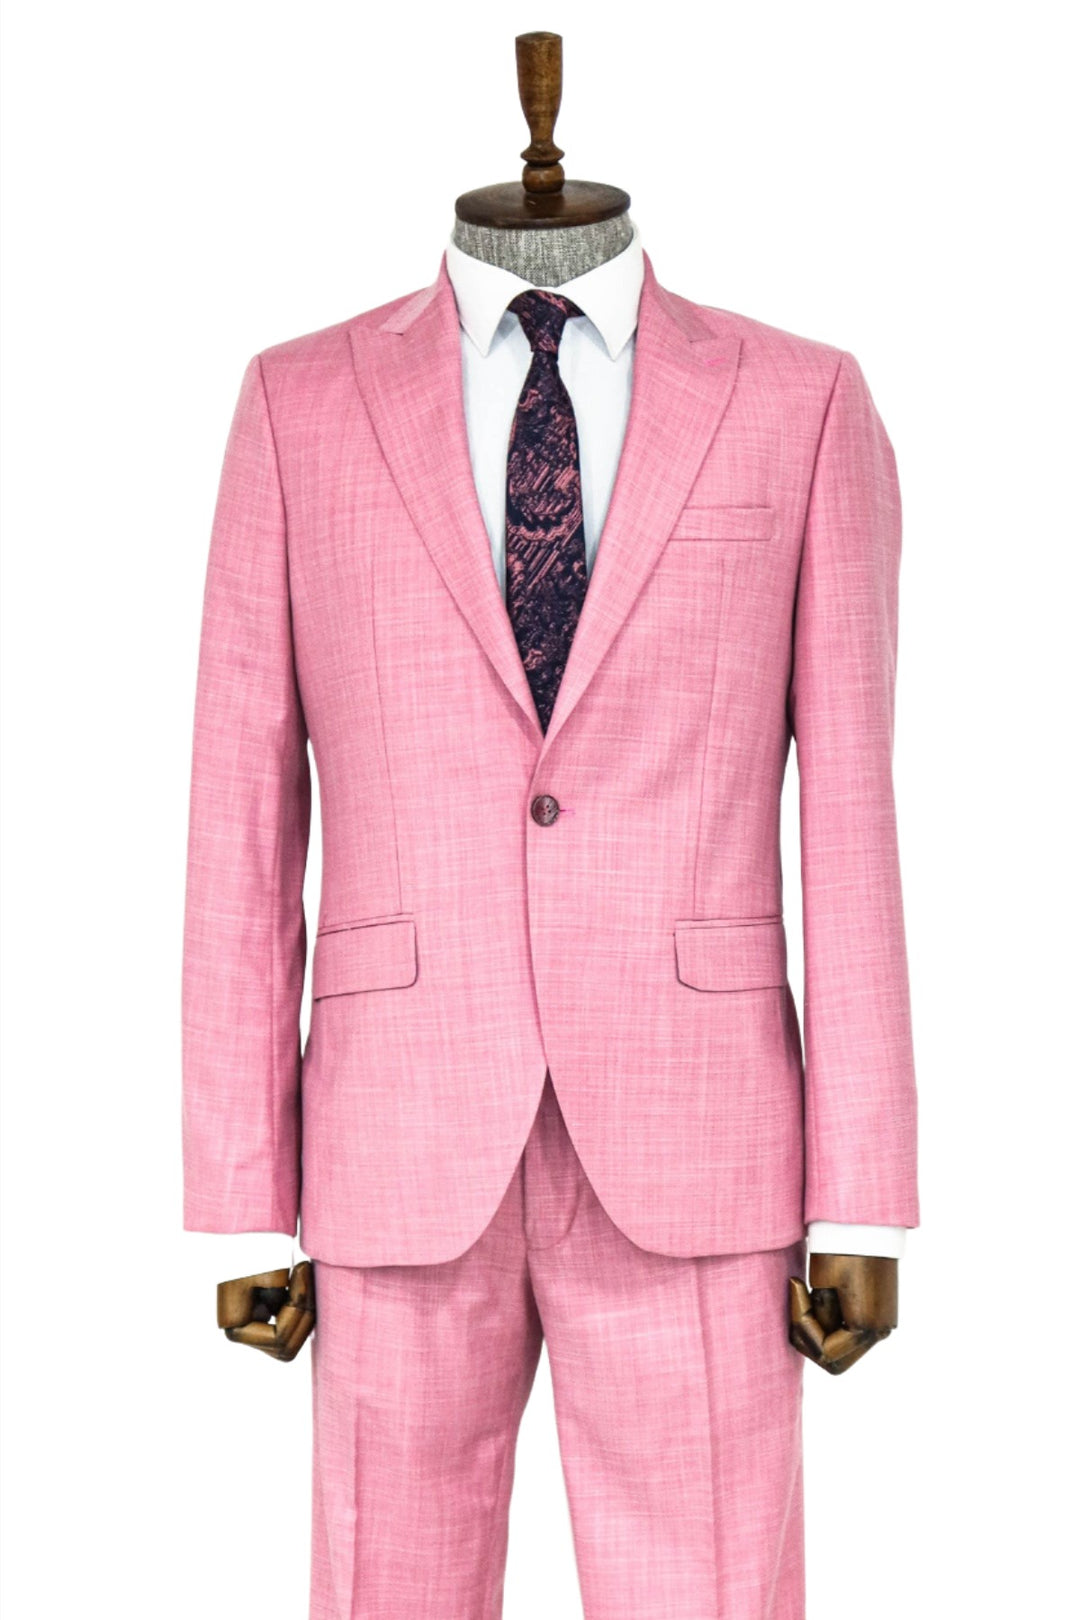 Patterned 2 Piece Slim Fit Pink Men Suit and Shirt Combination - Wessi